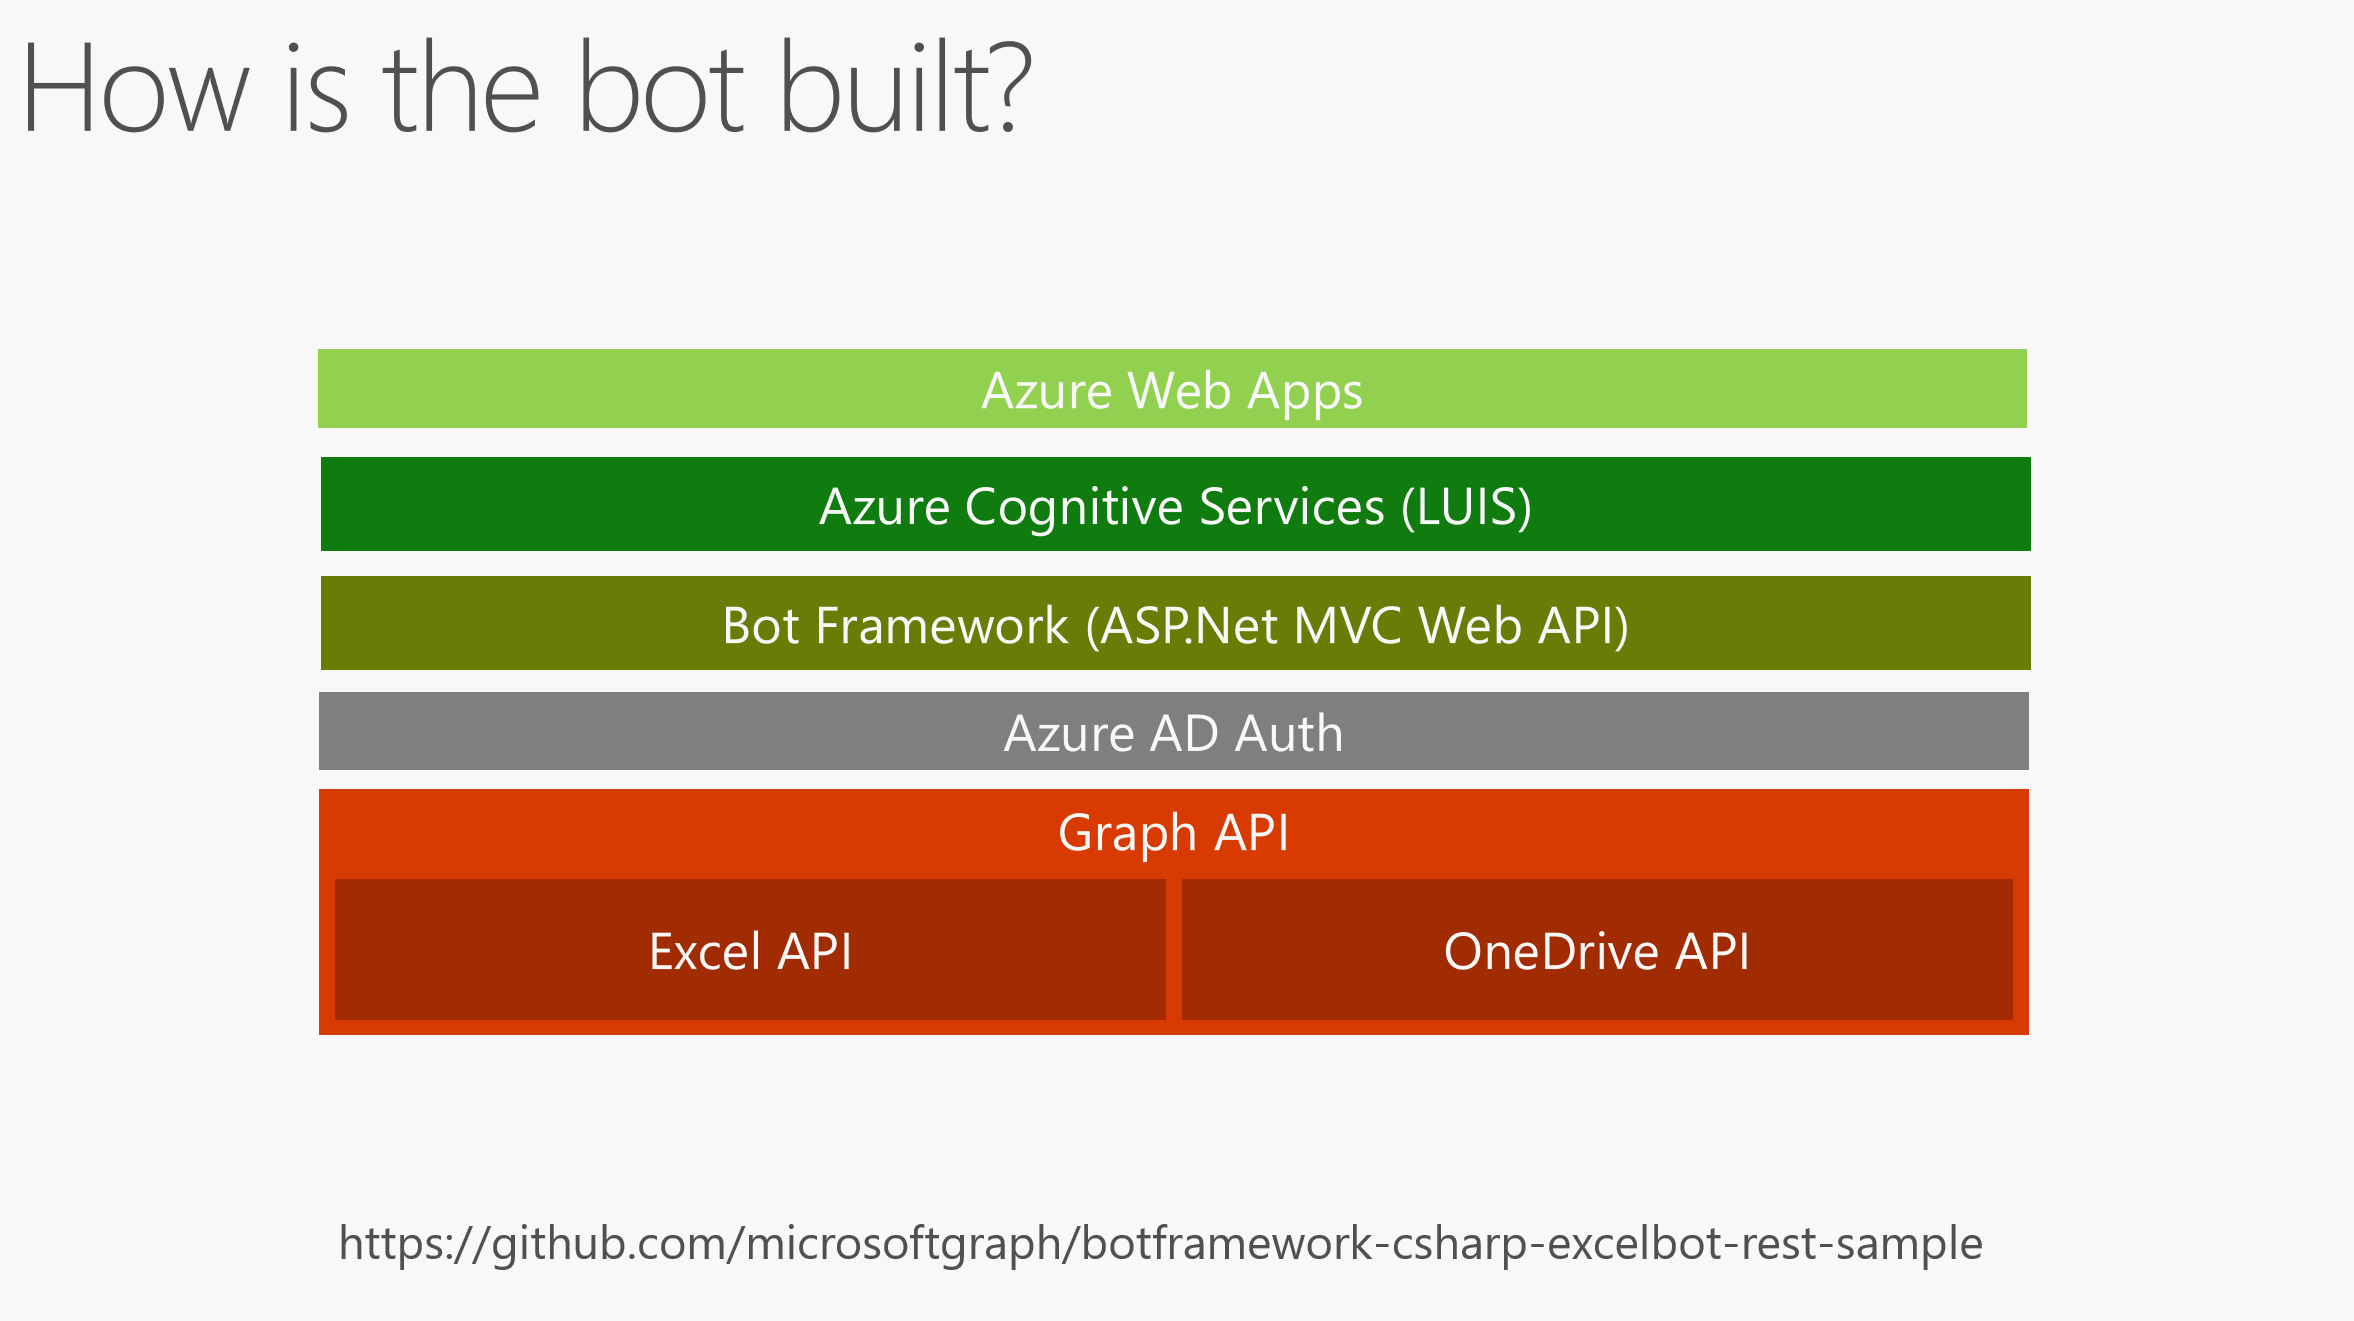 How is the bot built?